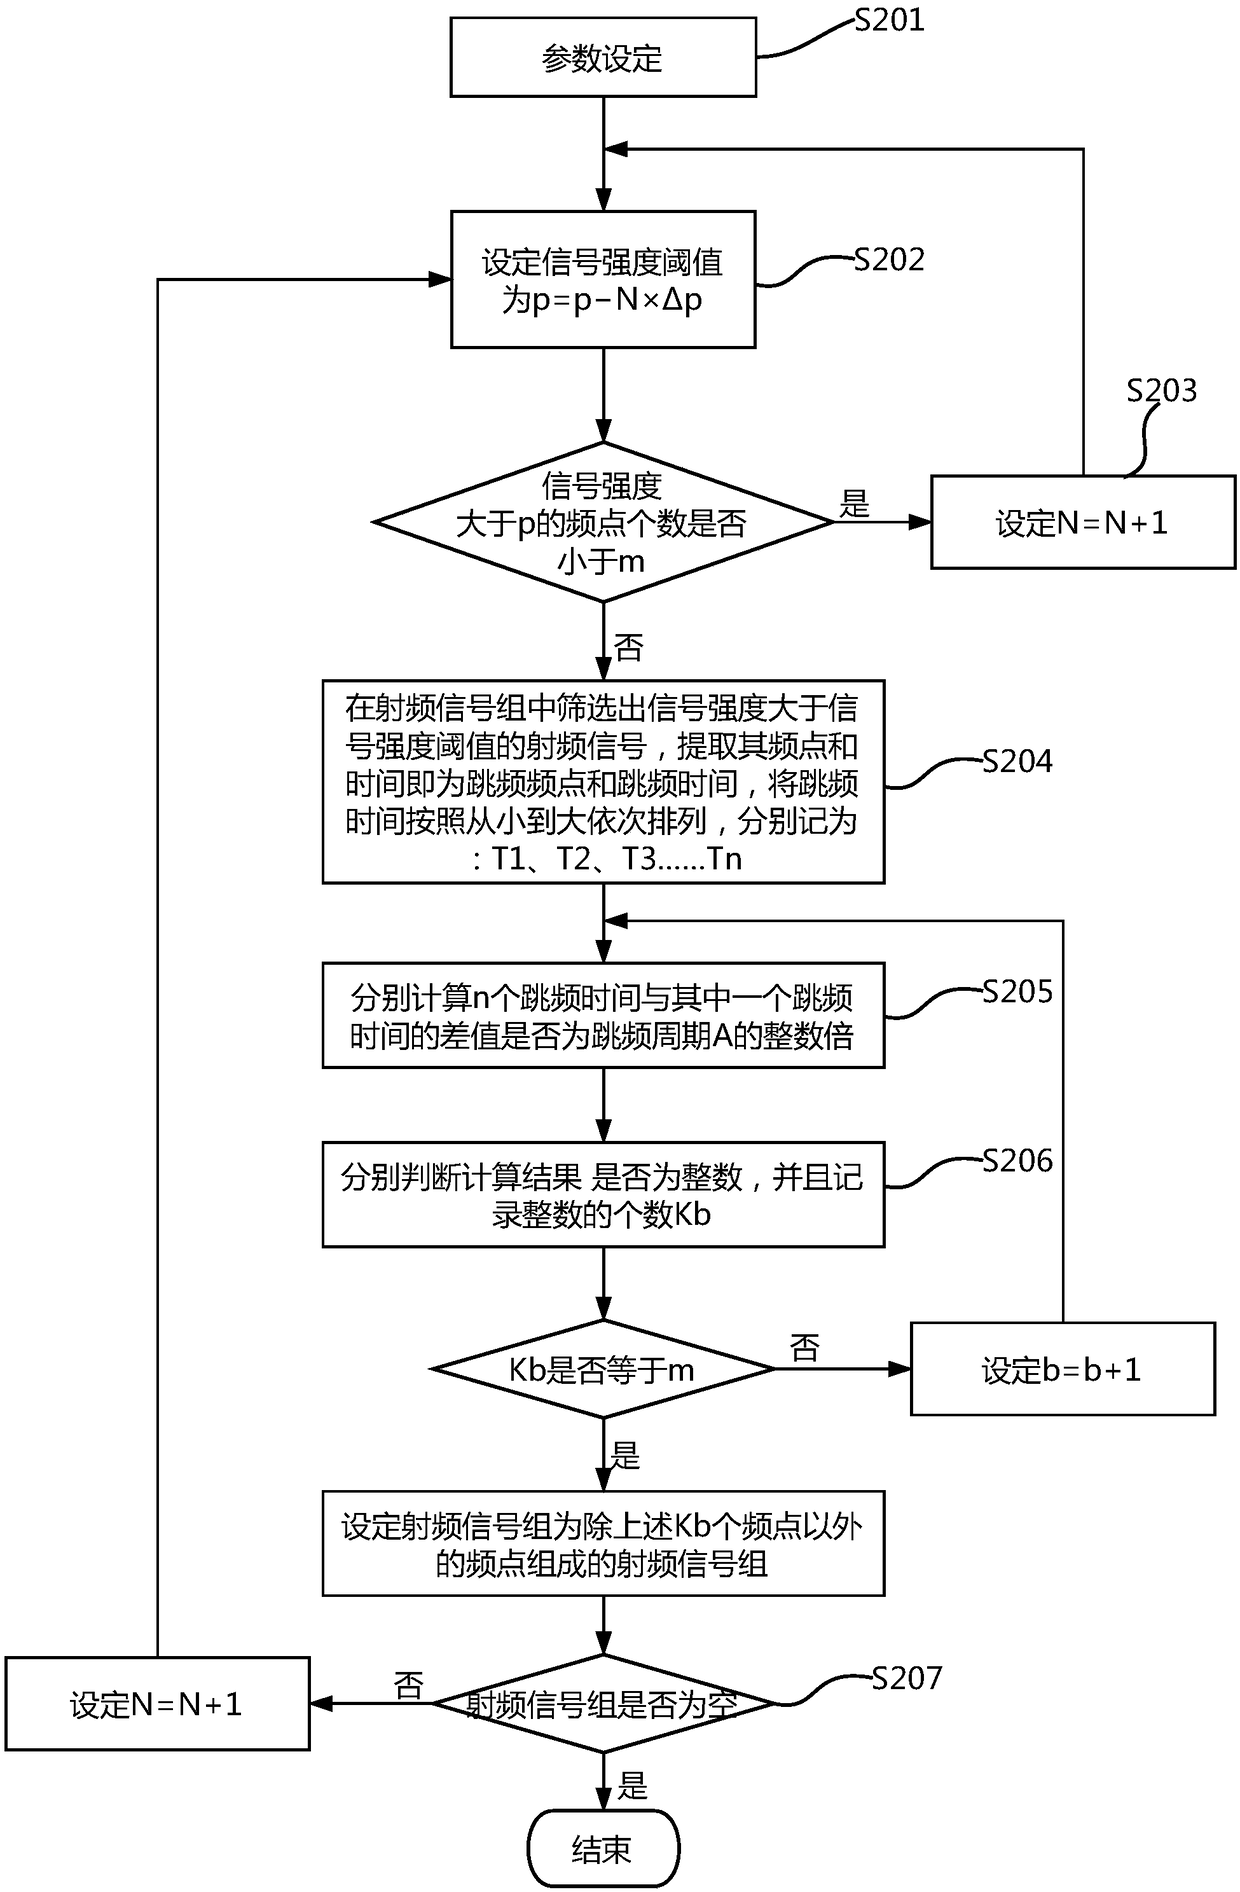 Unmanned aerial vehicle management method, terminal device and memory medium